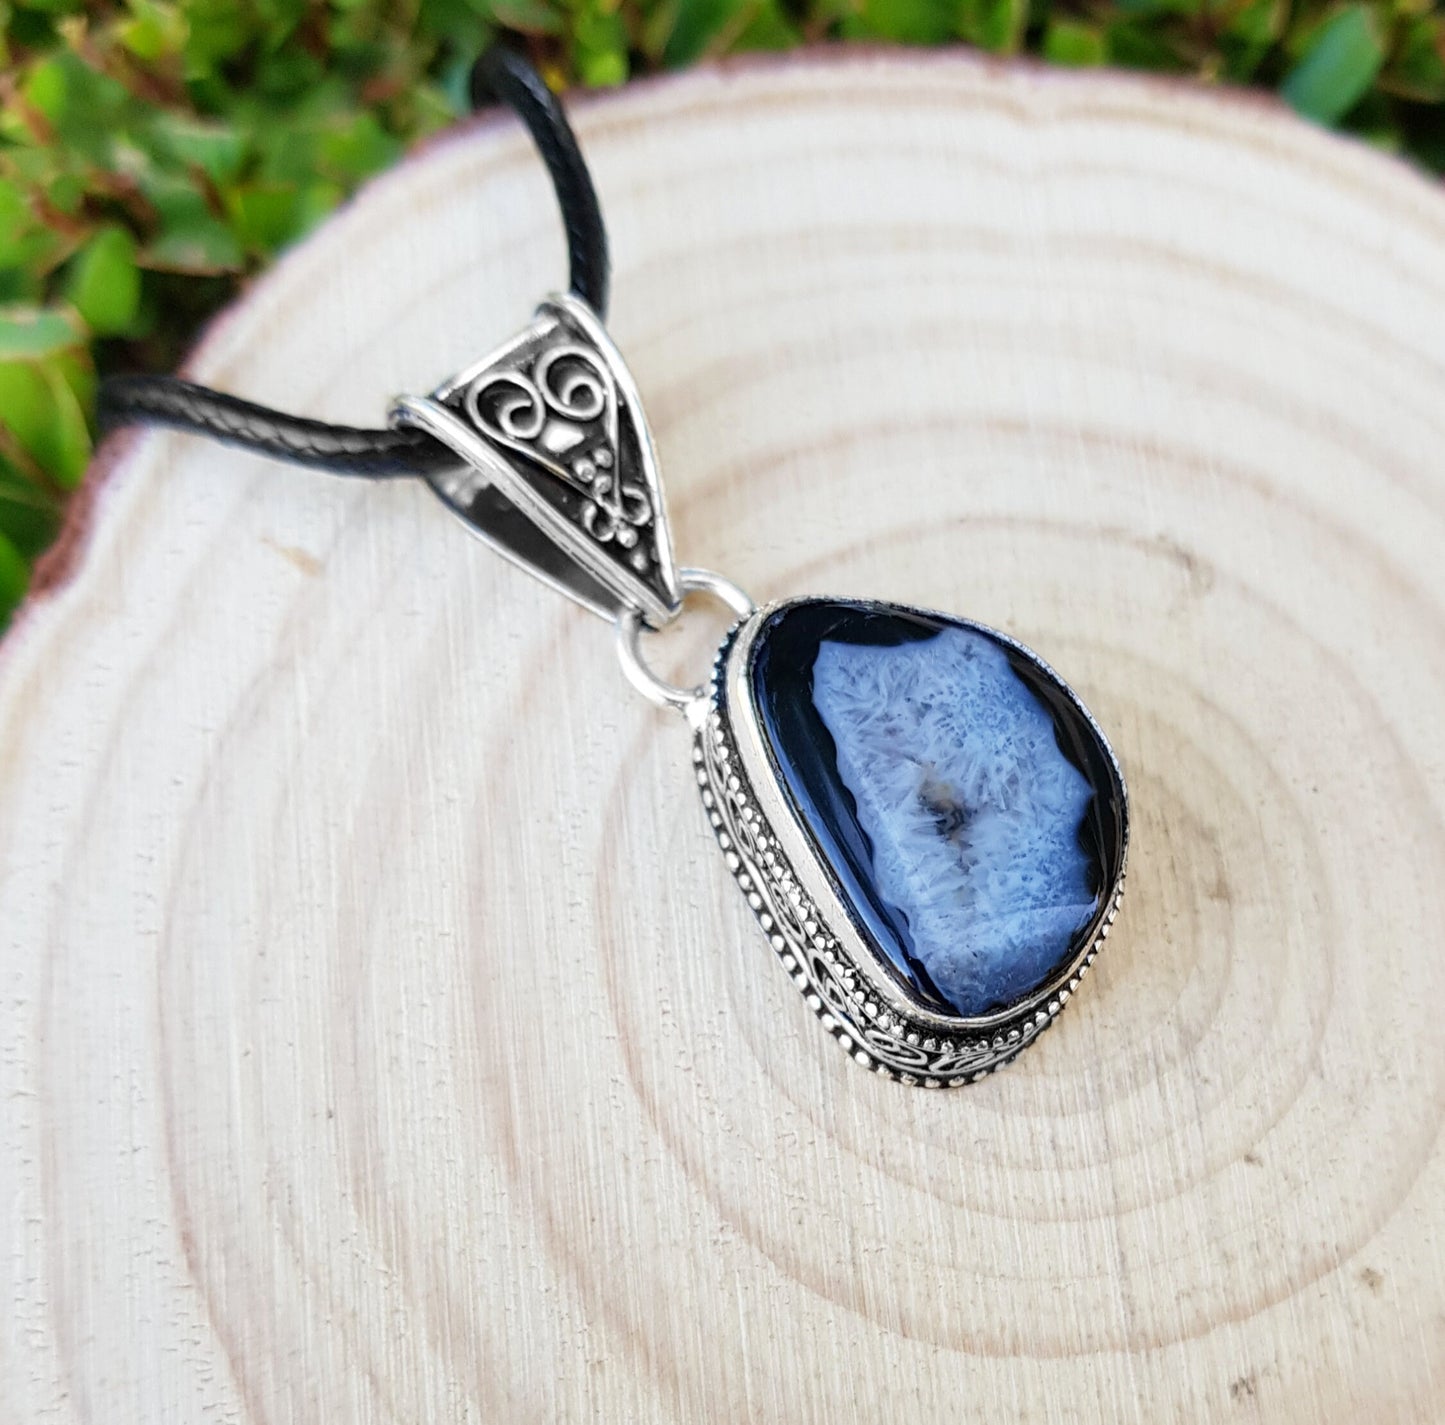 Small Black Solar Agate Pendant Statement Necklace In Sterling Silver Boho Gemstone Pendant One Of A Kind Jewelry